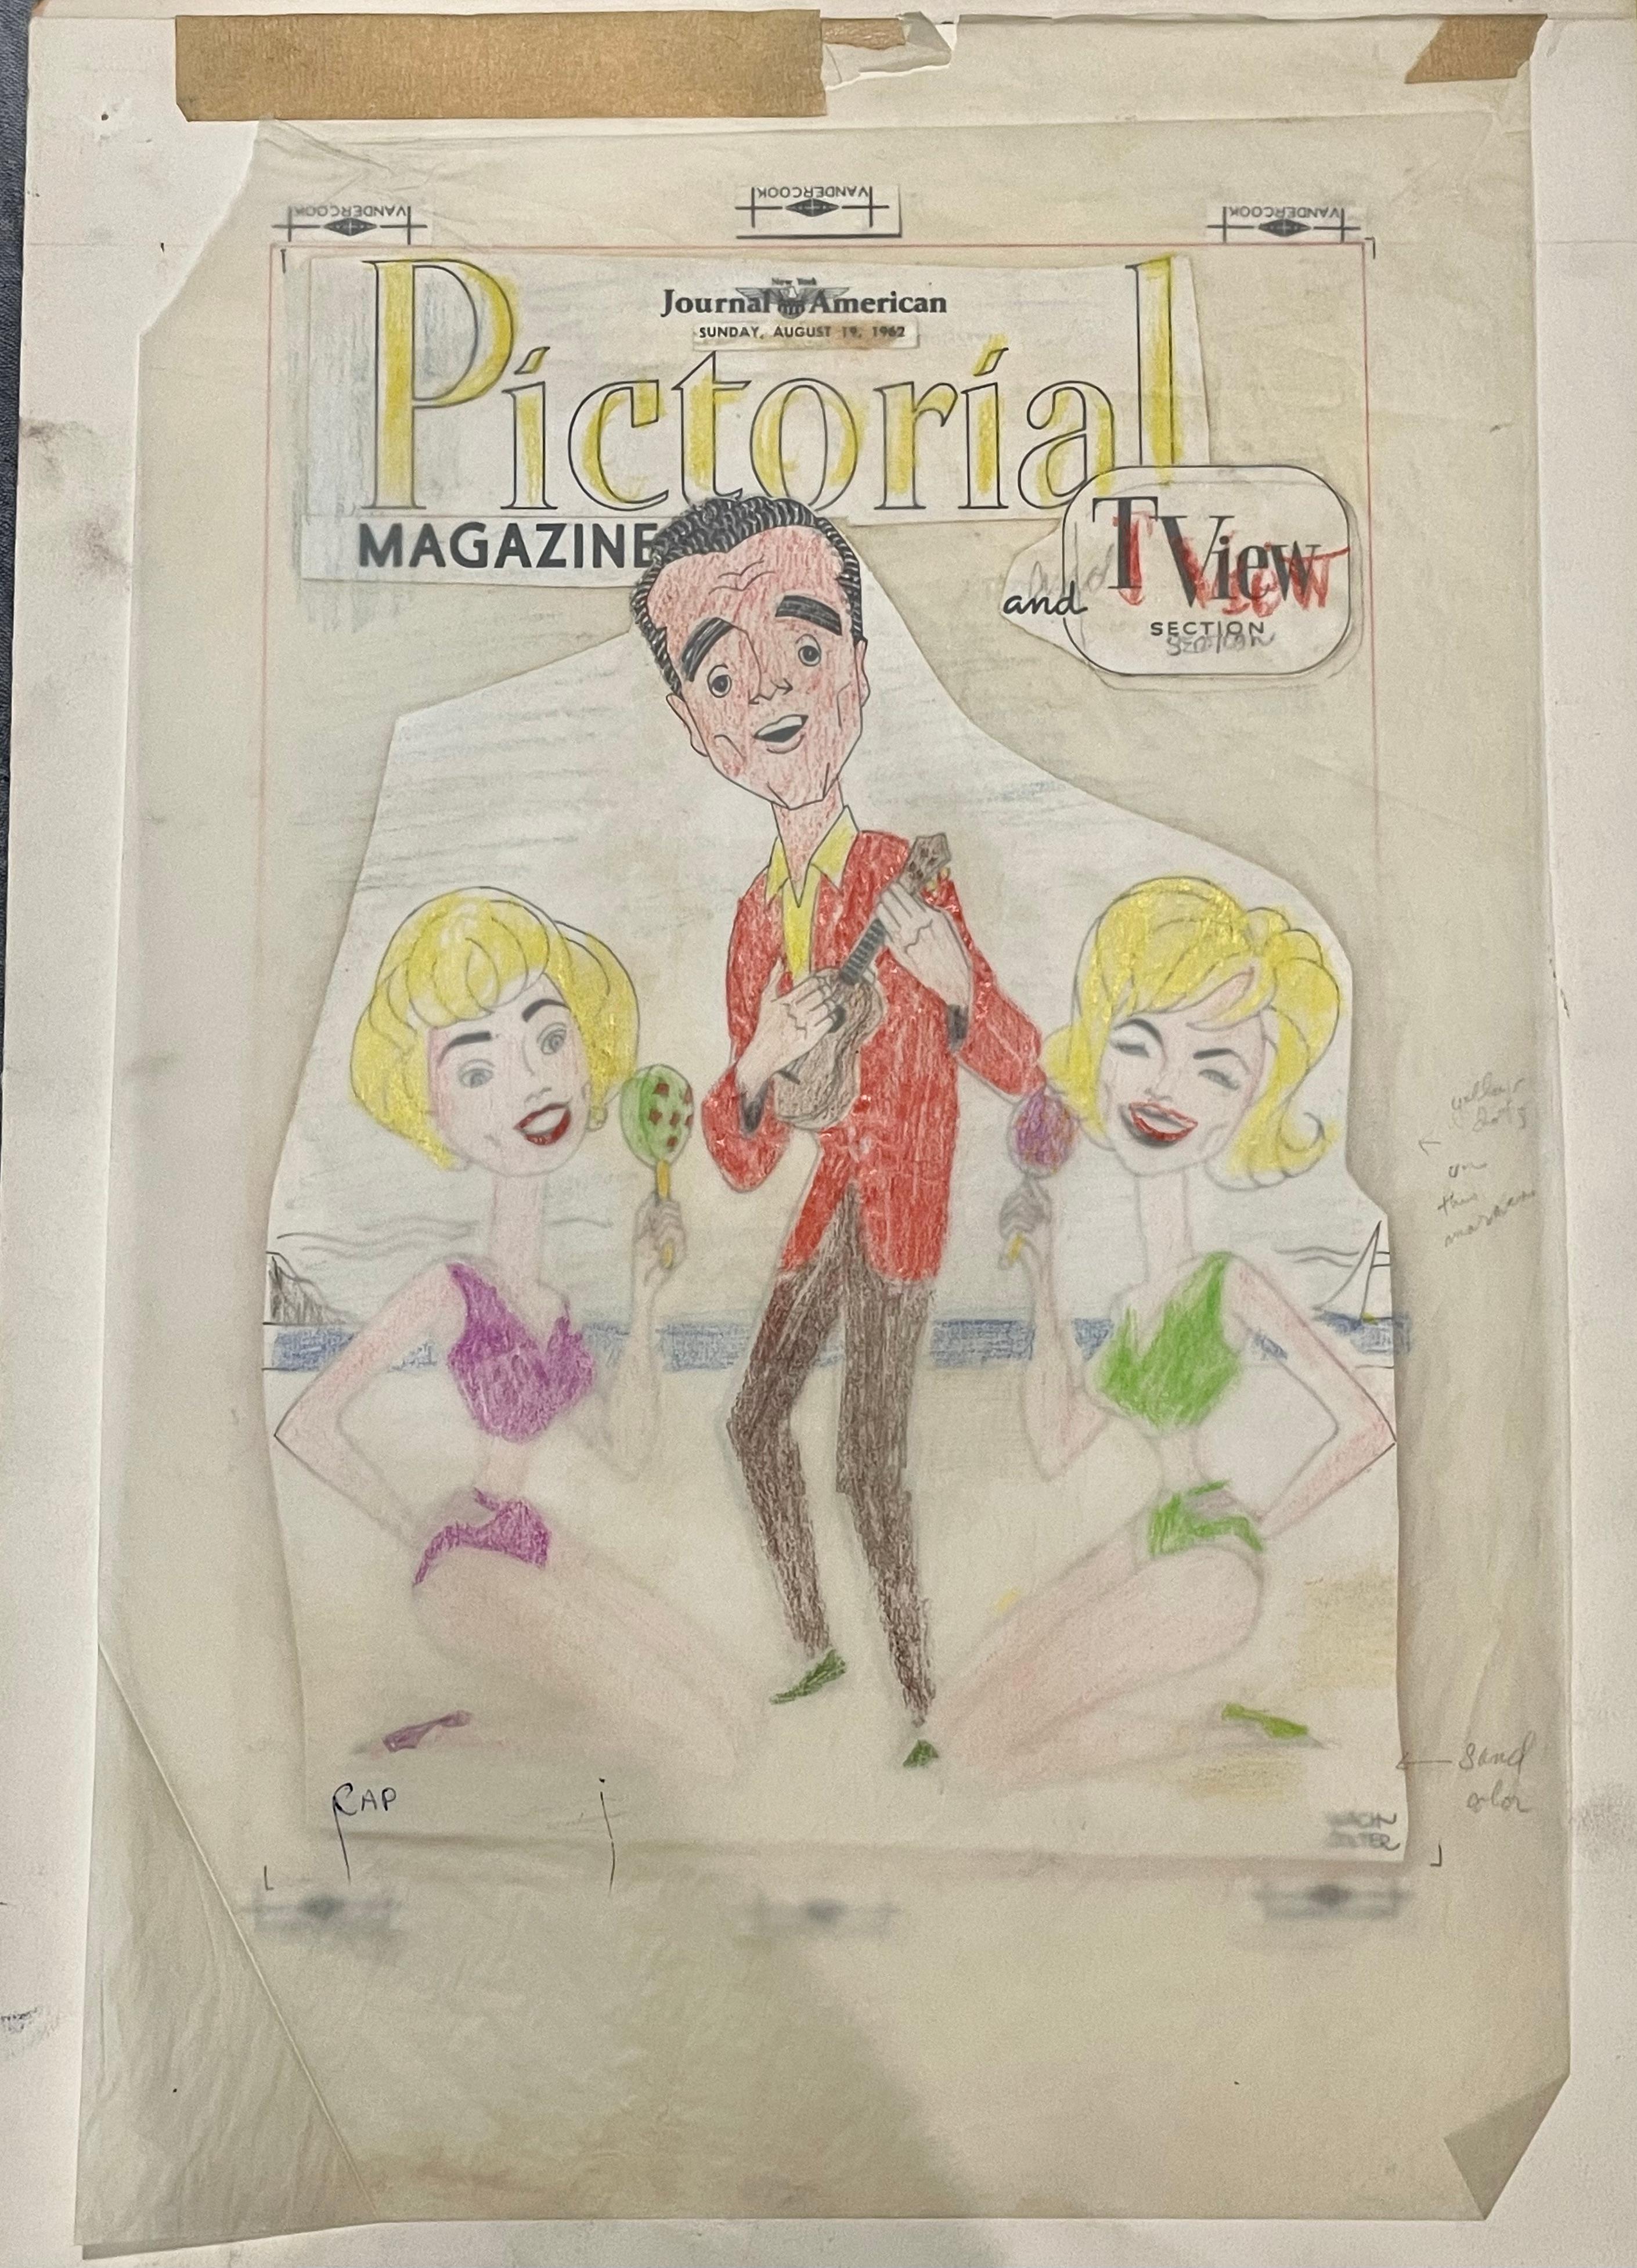 Signed Lower Right by Artist

PHOTOSTAT ILLUSTRATION & COMP COLOR OVERLAY - Caricature by George Wachsteter (1911-2004) for 1962 NBC-TV variety show 'The Lively Ones' with star & host Vic Damone, 14